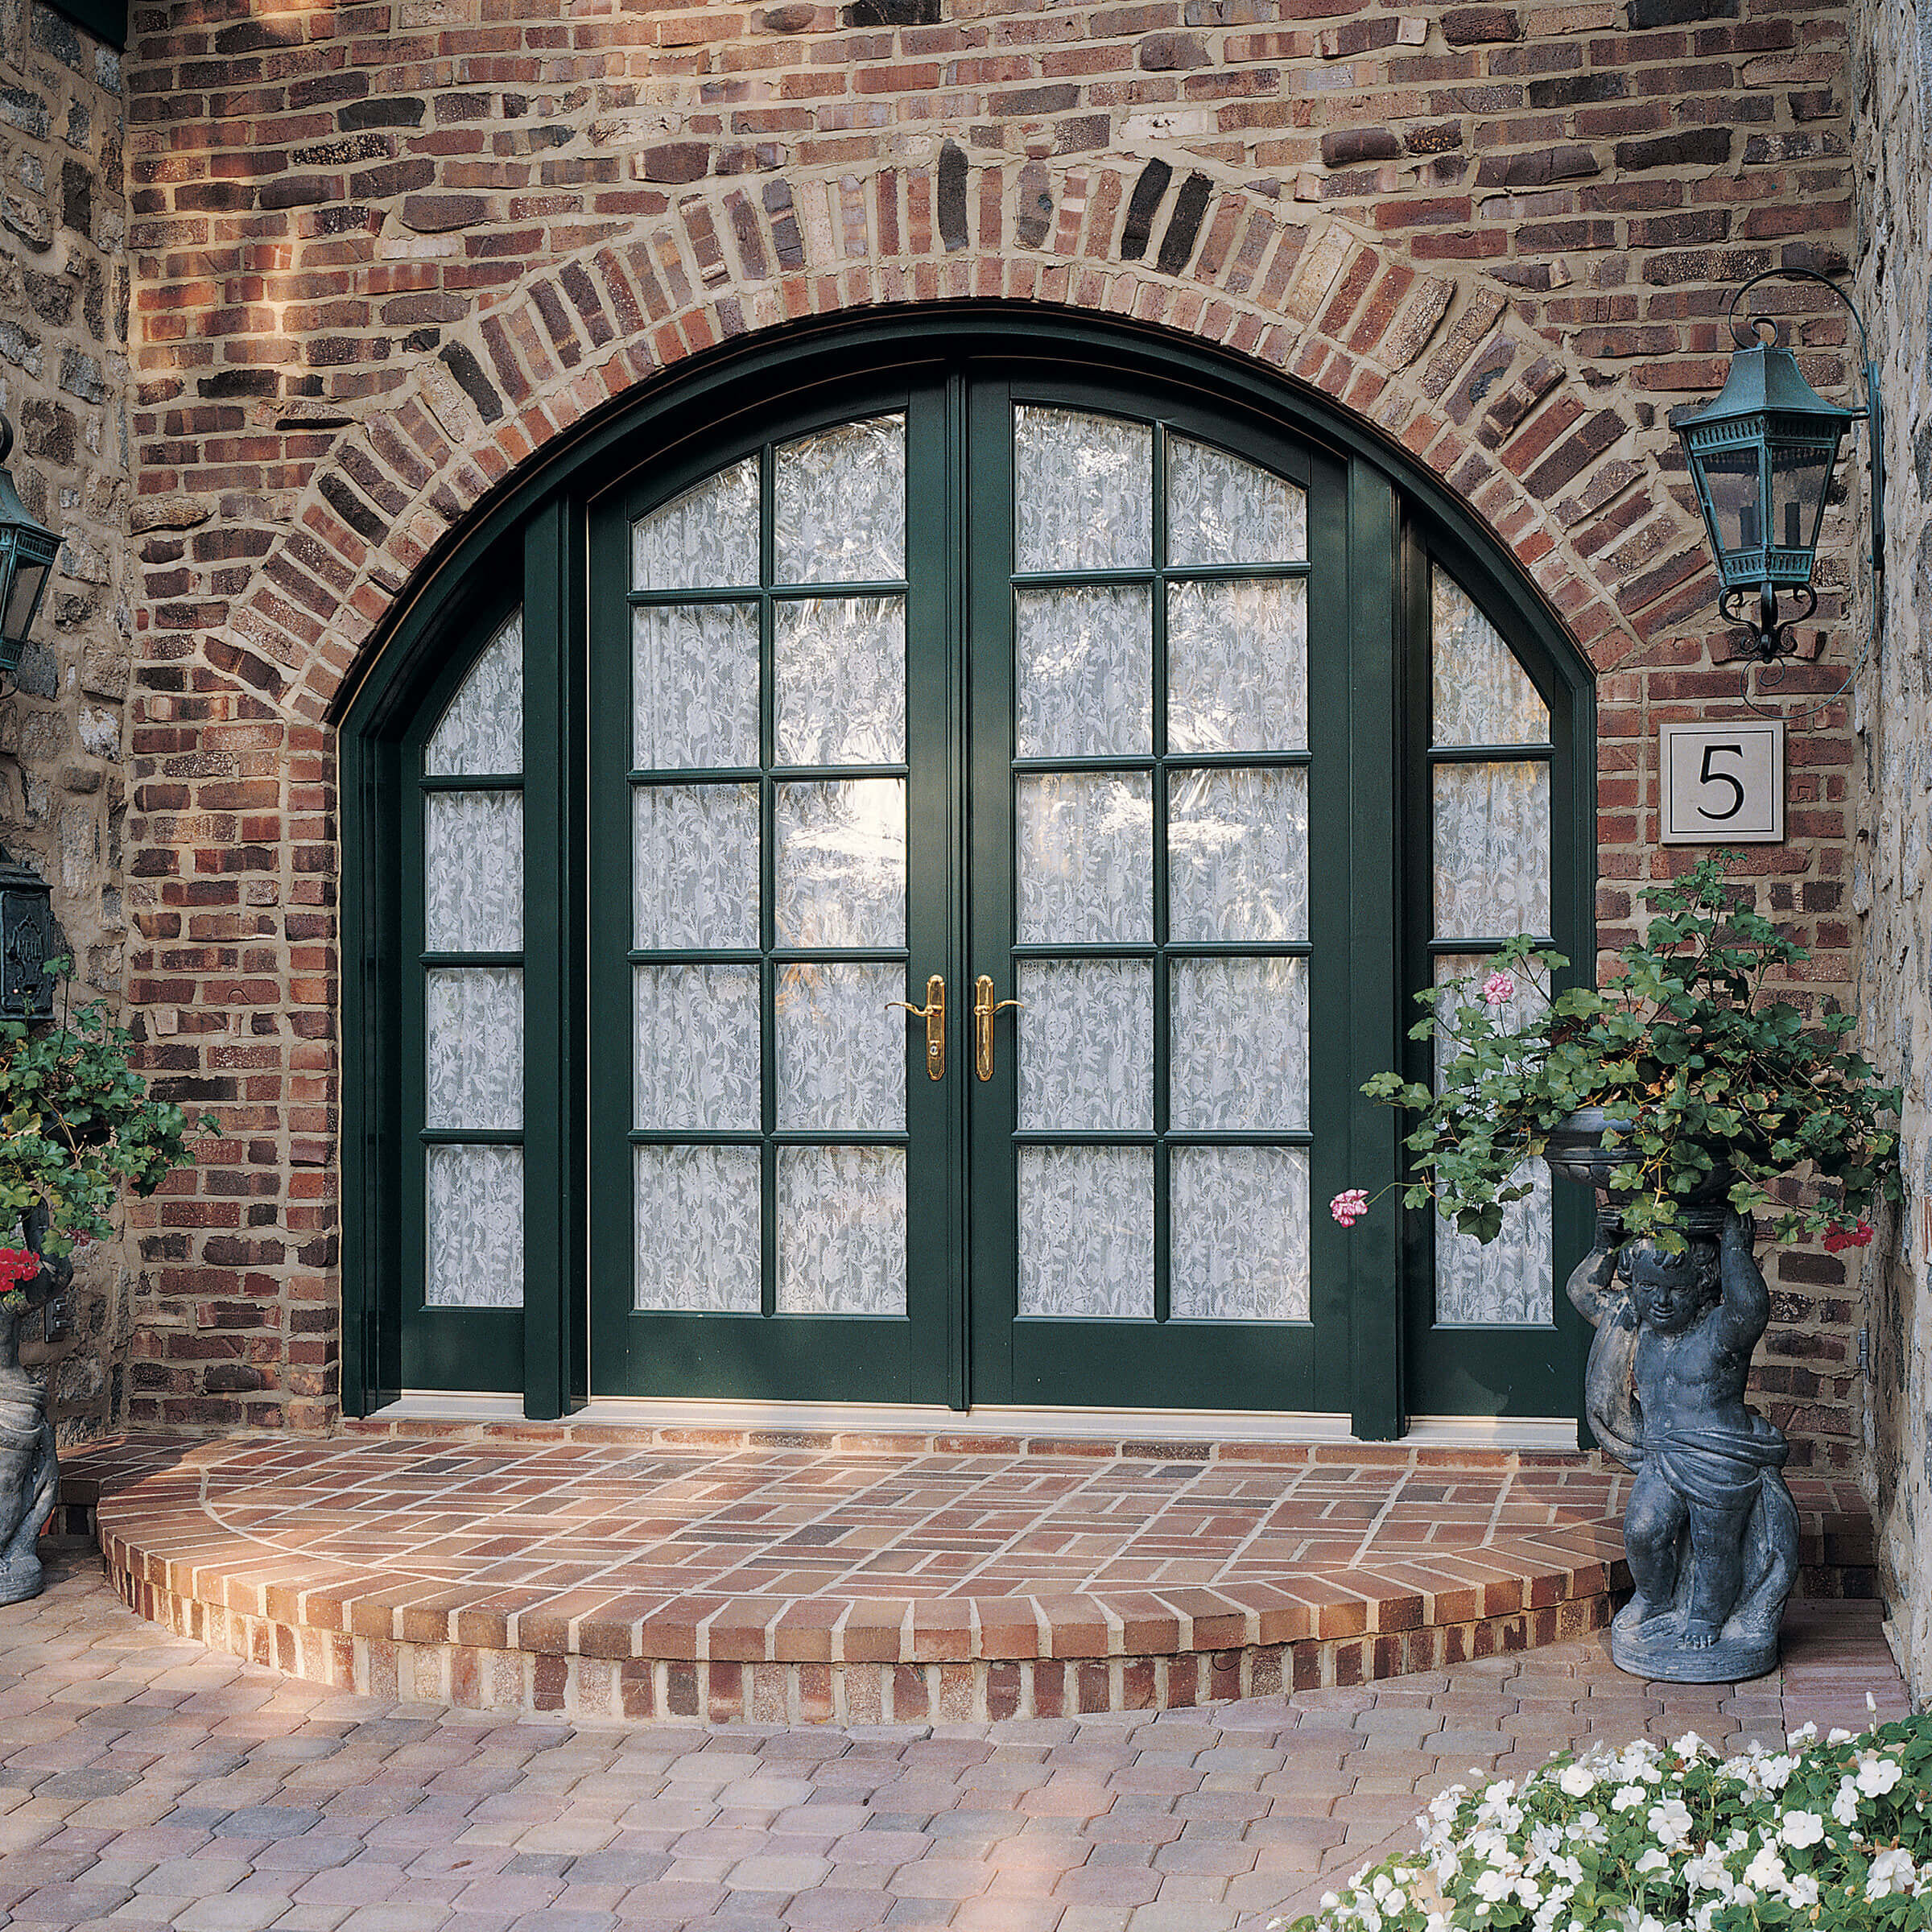 Beautiful Stone-Faced Entrance Of House With Signature Ultimate Swinging Arch Top French Door 